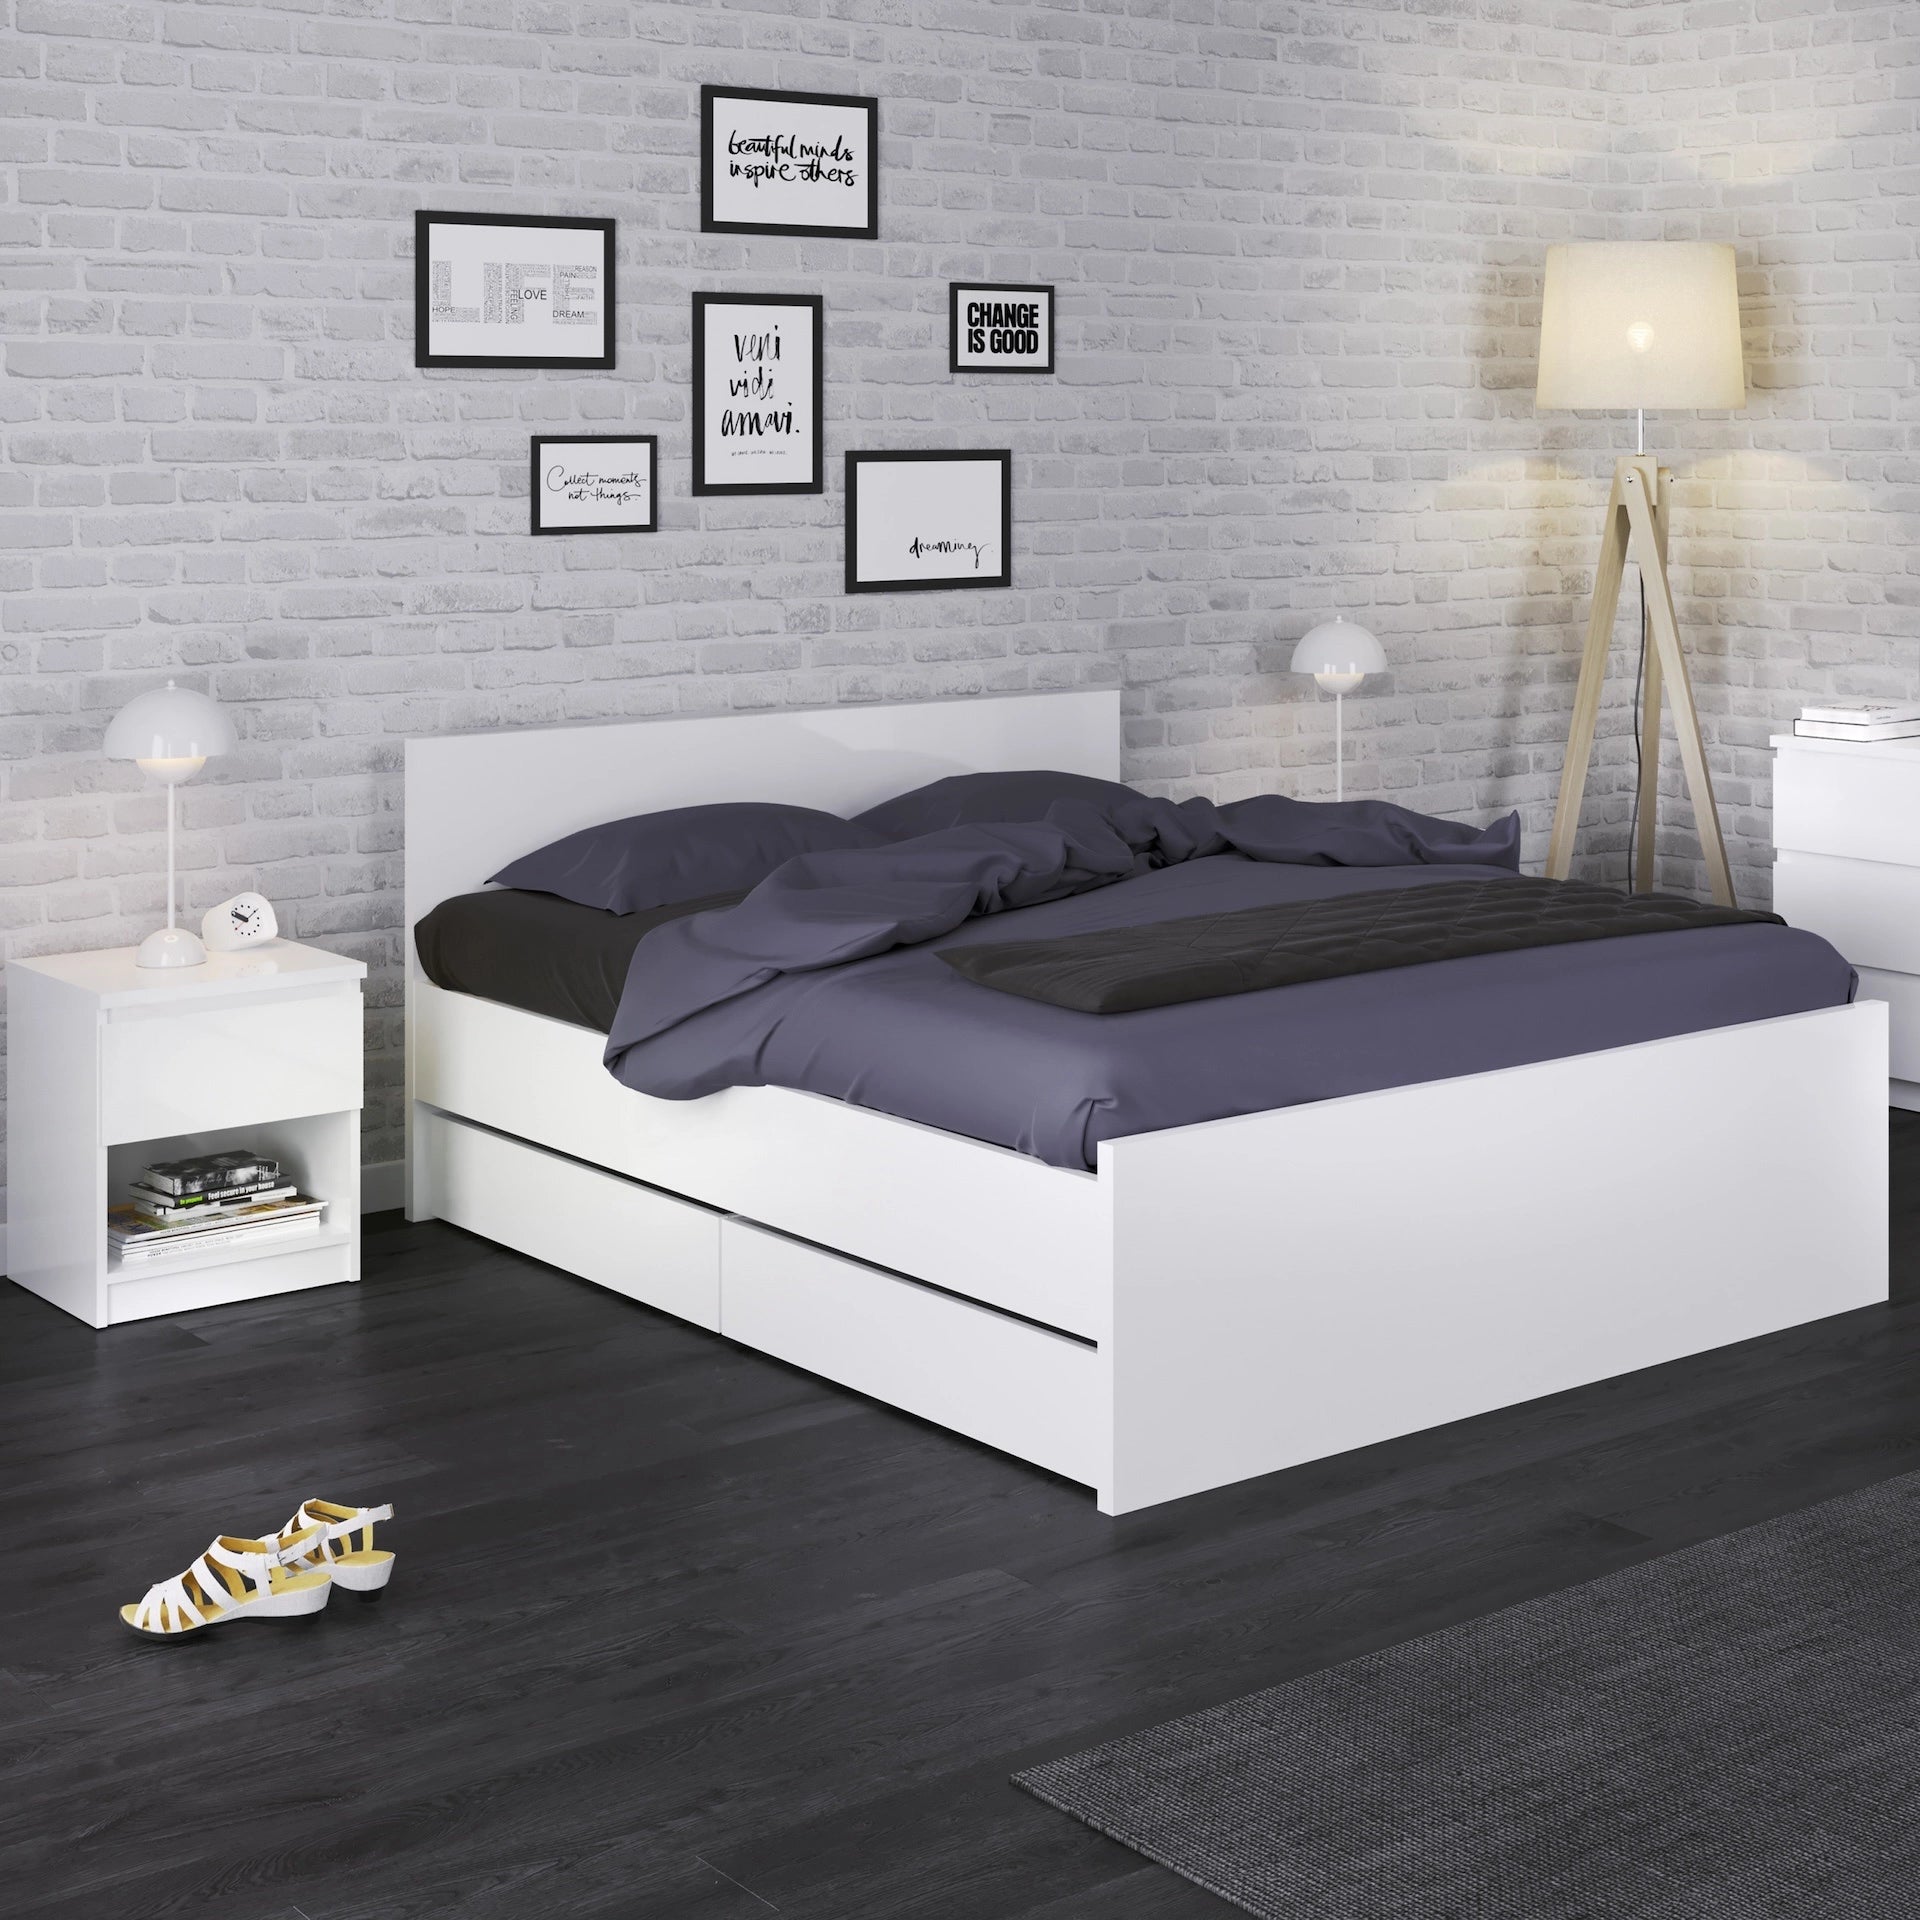 Furniture To Go Naia 4ft 6in Double Bed in White High Gloss